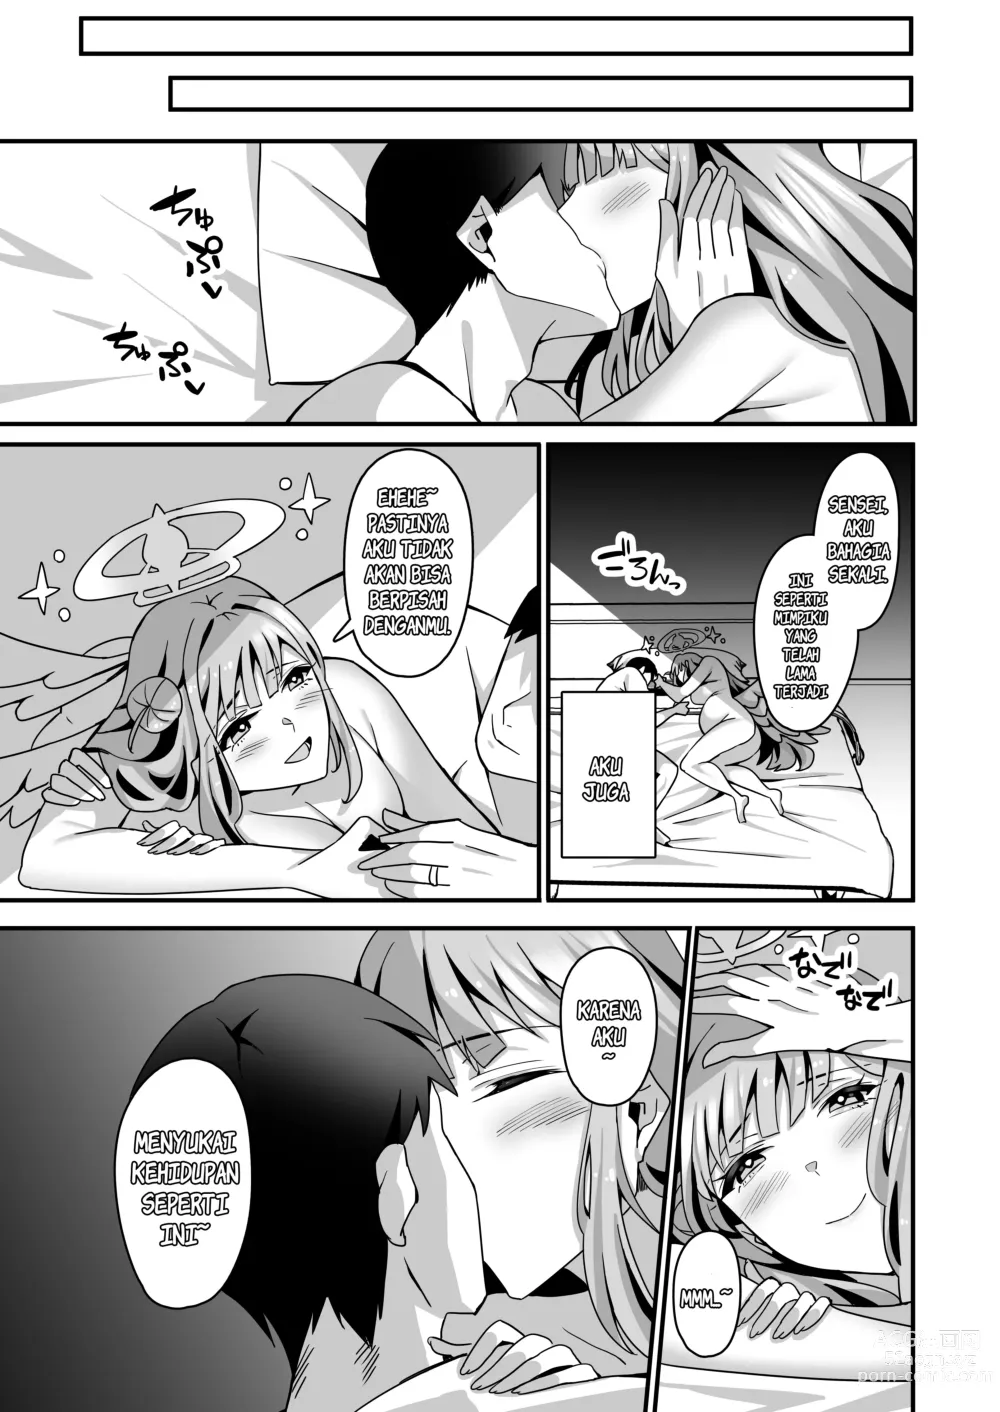 Page 32 of doujinshi Mika to Happy Love Love Sex Shite Haramaseru Hon - A book about happy loving sex with Mika and impregnation.